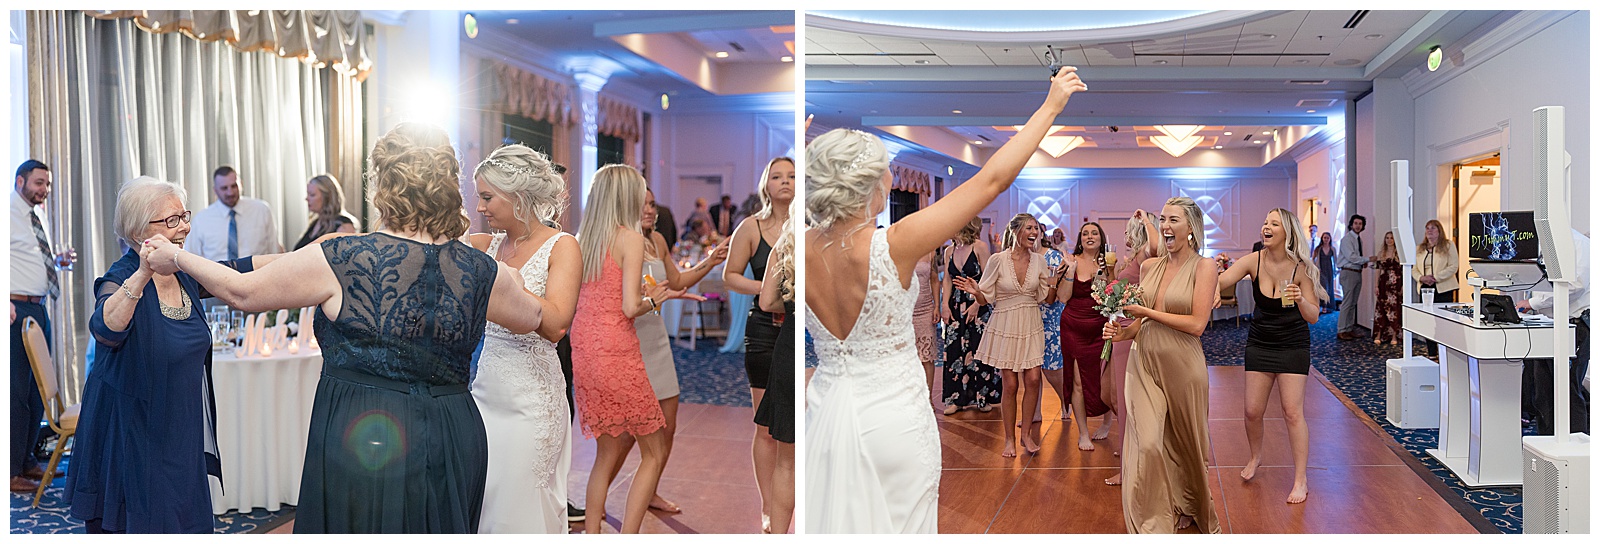 bride dancing with friends and family during wedding reception at water's edge event center